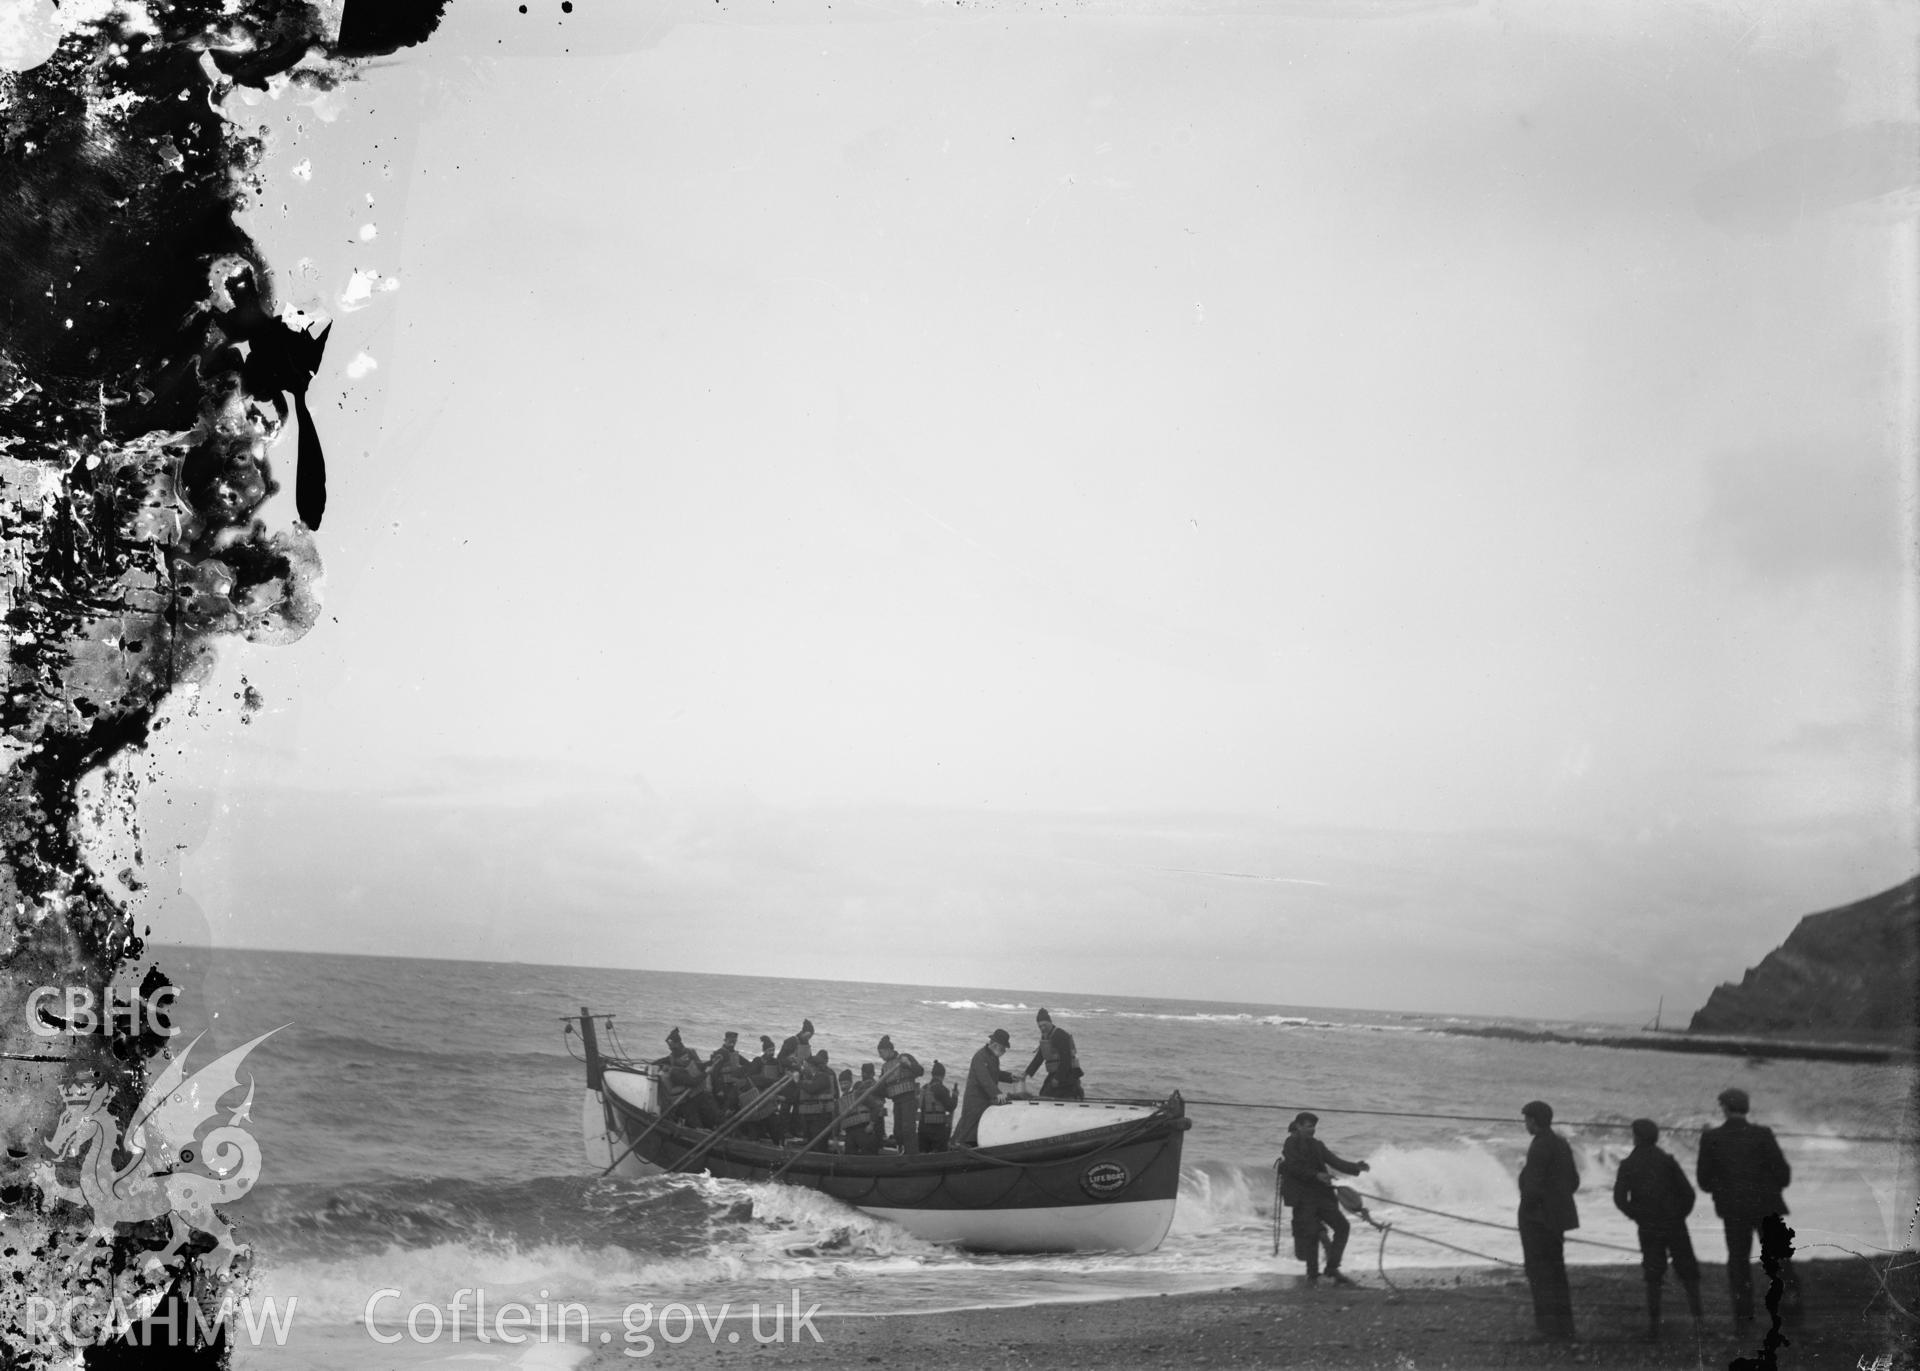 Black and white image dating from c.1910 showing the RNLI lifeboat and crew on the beach at Aberystwyth.